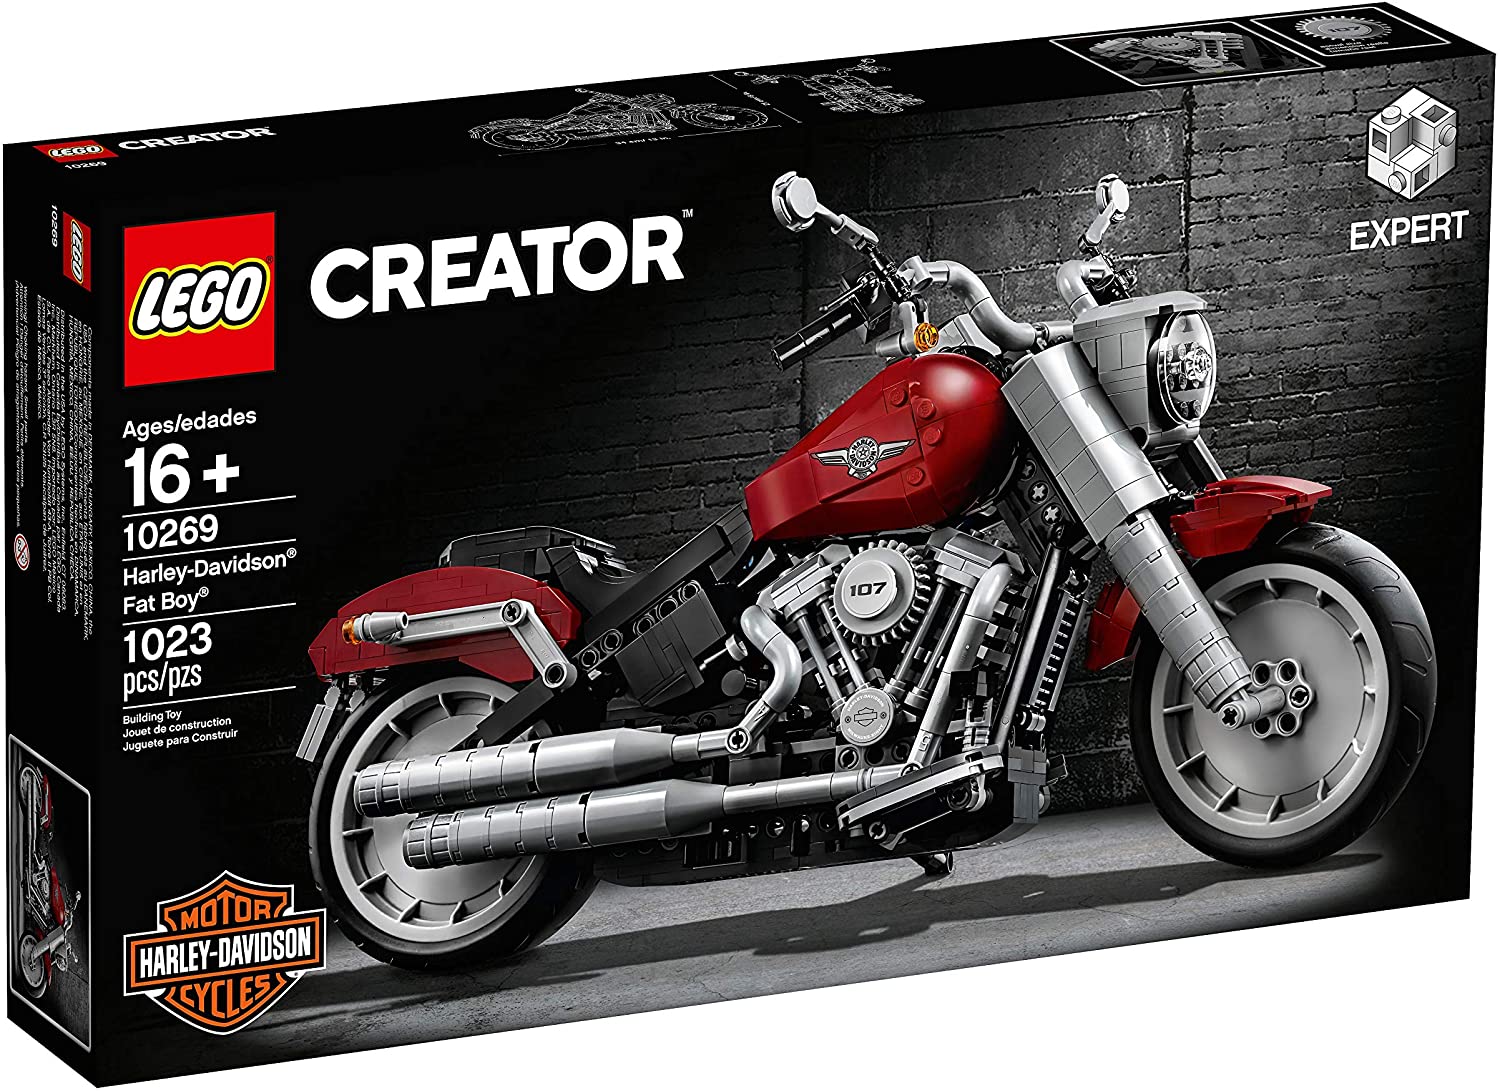 7 Best LEGO Motorcycle Sets 2022 - Buying Guide & Reviews 3